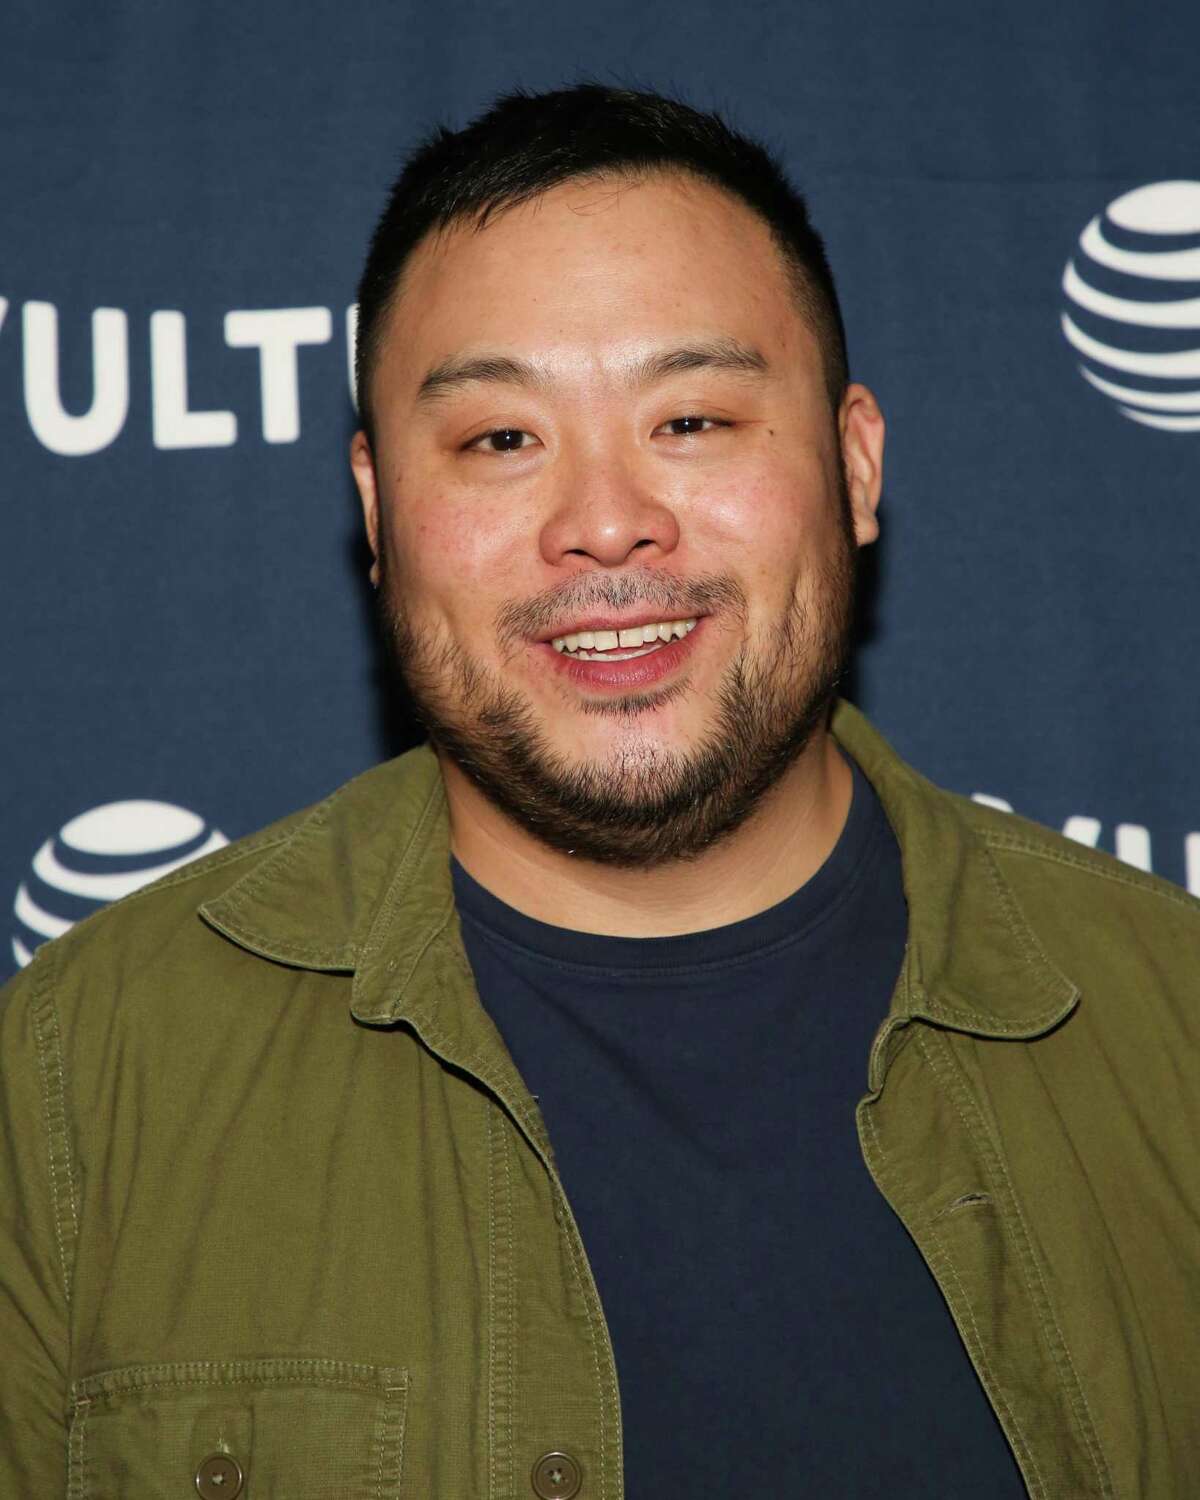 HOLLYWOOD, CALIFORNIA - NOVEMBER 09: David Chang attends the Vulture Festival Los Angeles 2019 - Day 1 at Hollywood Roosevelt Hotel on November 09, 2019 in Hollywood, California. (Photo by Paul Archuleta/Getty Images)